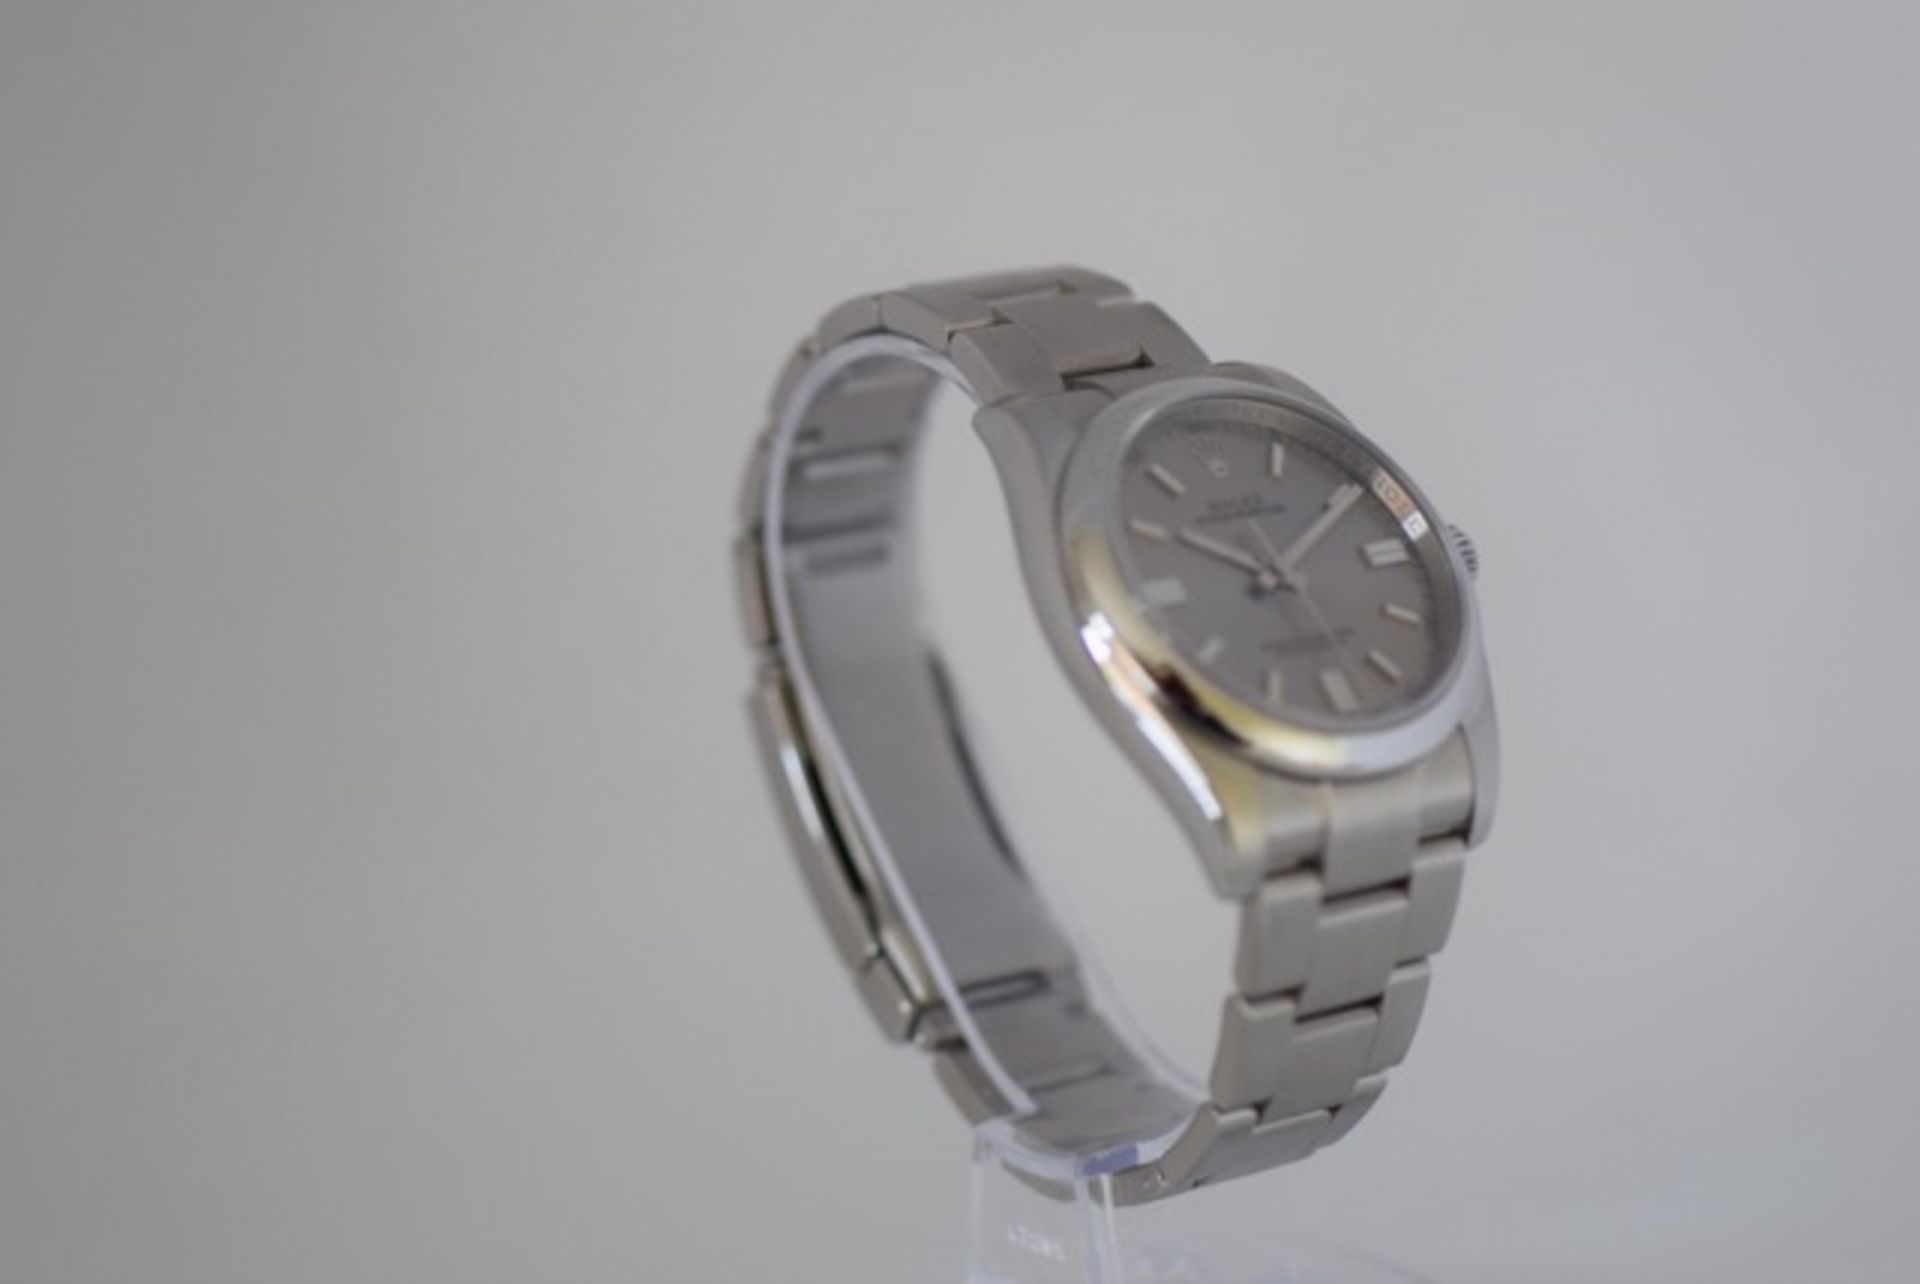 ROLEX OYSTER 116000 WATCH - Image 3 of 8